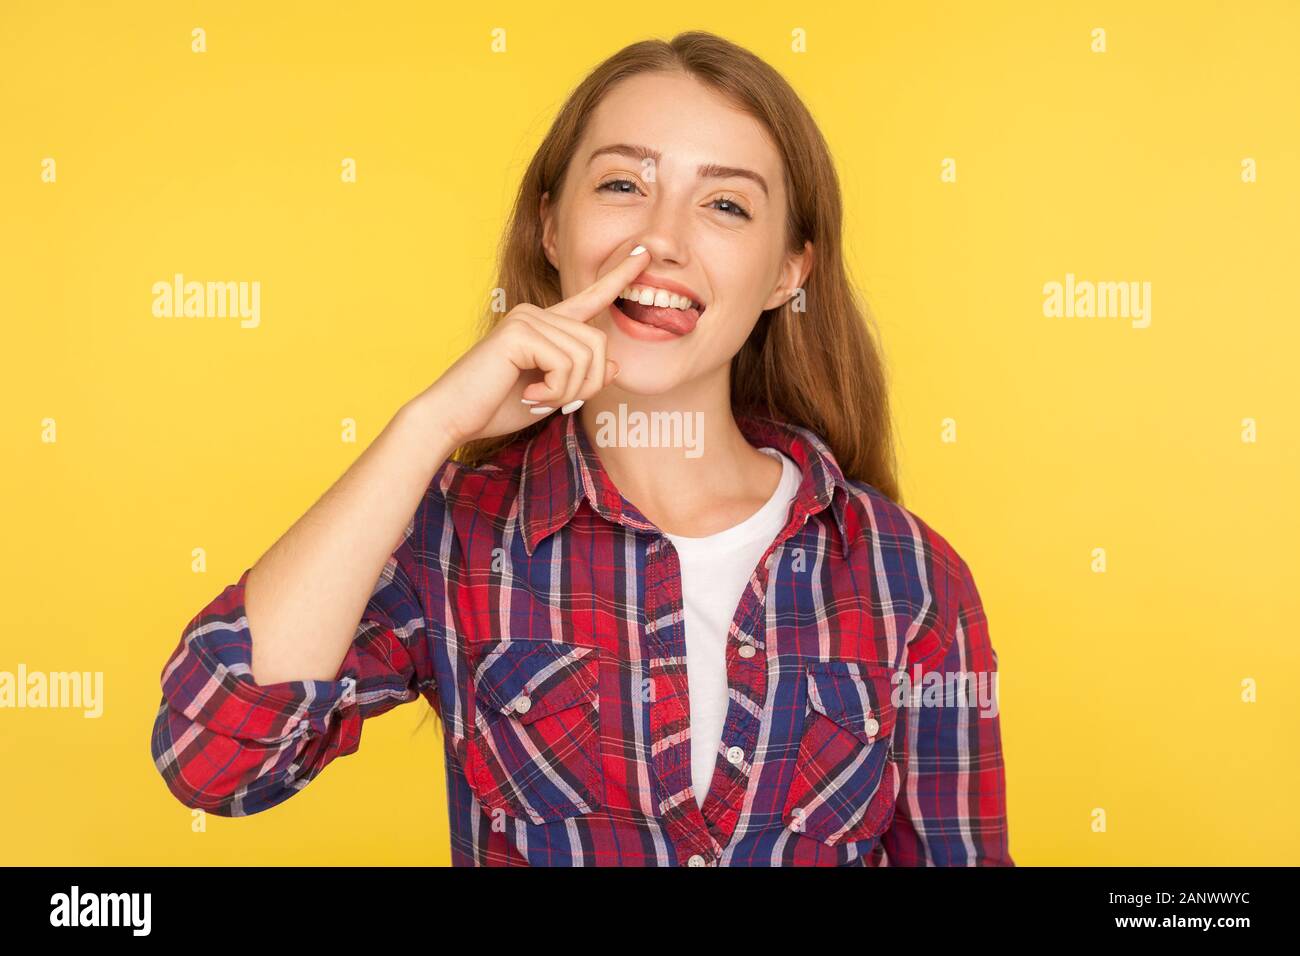 Portrait of funny childish ginger girl in checkered shirt picking her nose and demonstrating tongue with comical silly expression, pulling out boogers Stock Photo